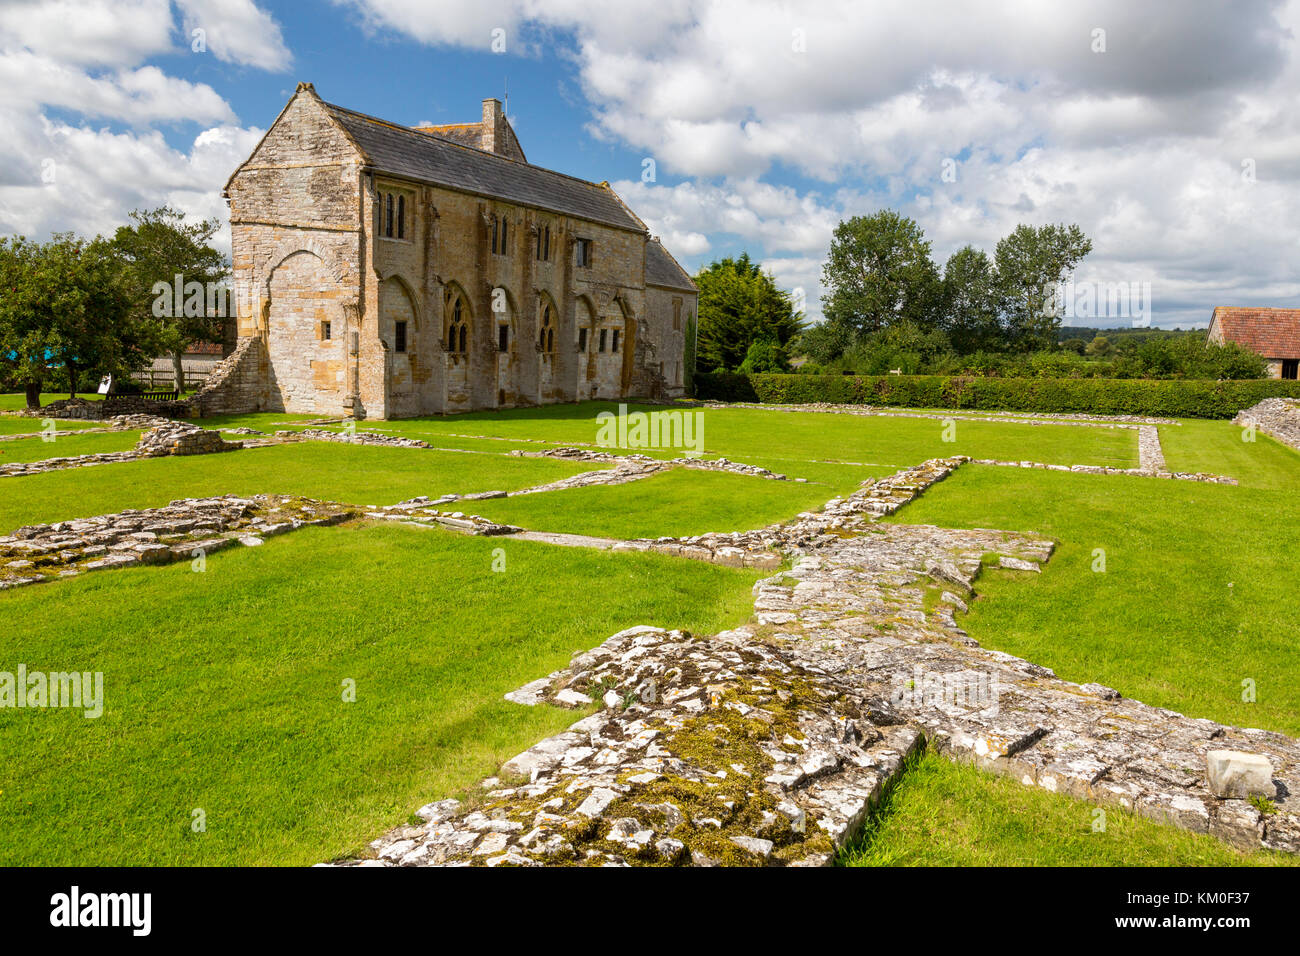 Only the Abbot's House of the former medieval Benedictine abbey and the positions of walls and buildings remain in Muchelney, Somerset, England, UK Stock Photo